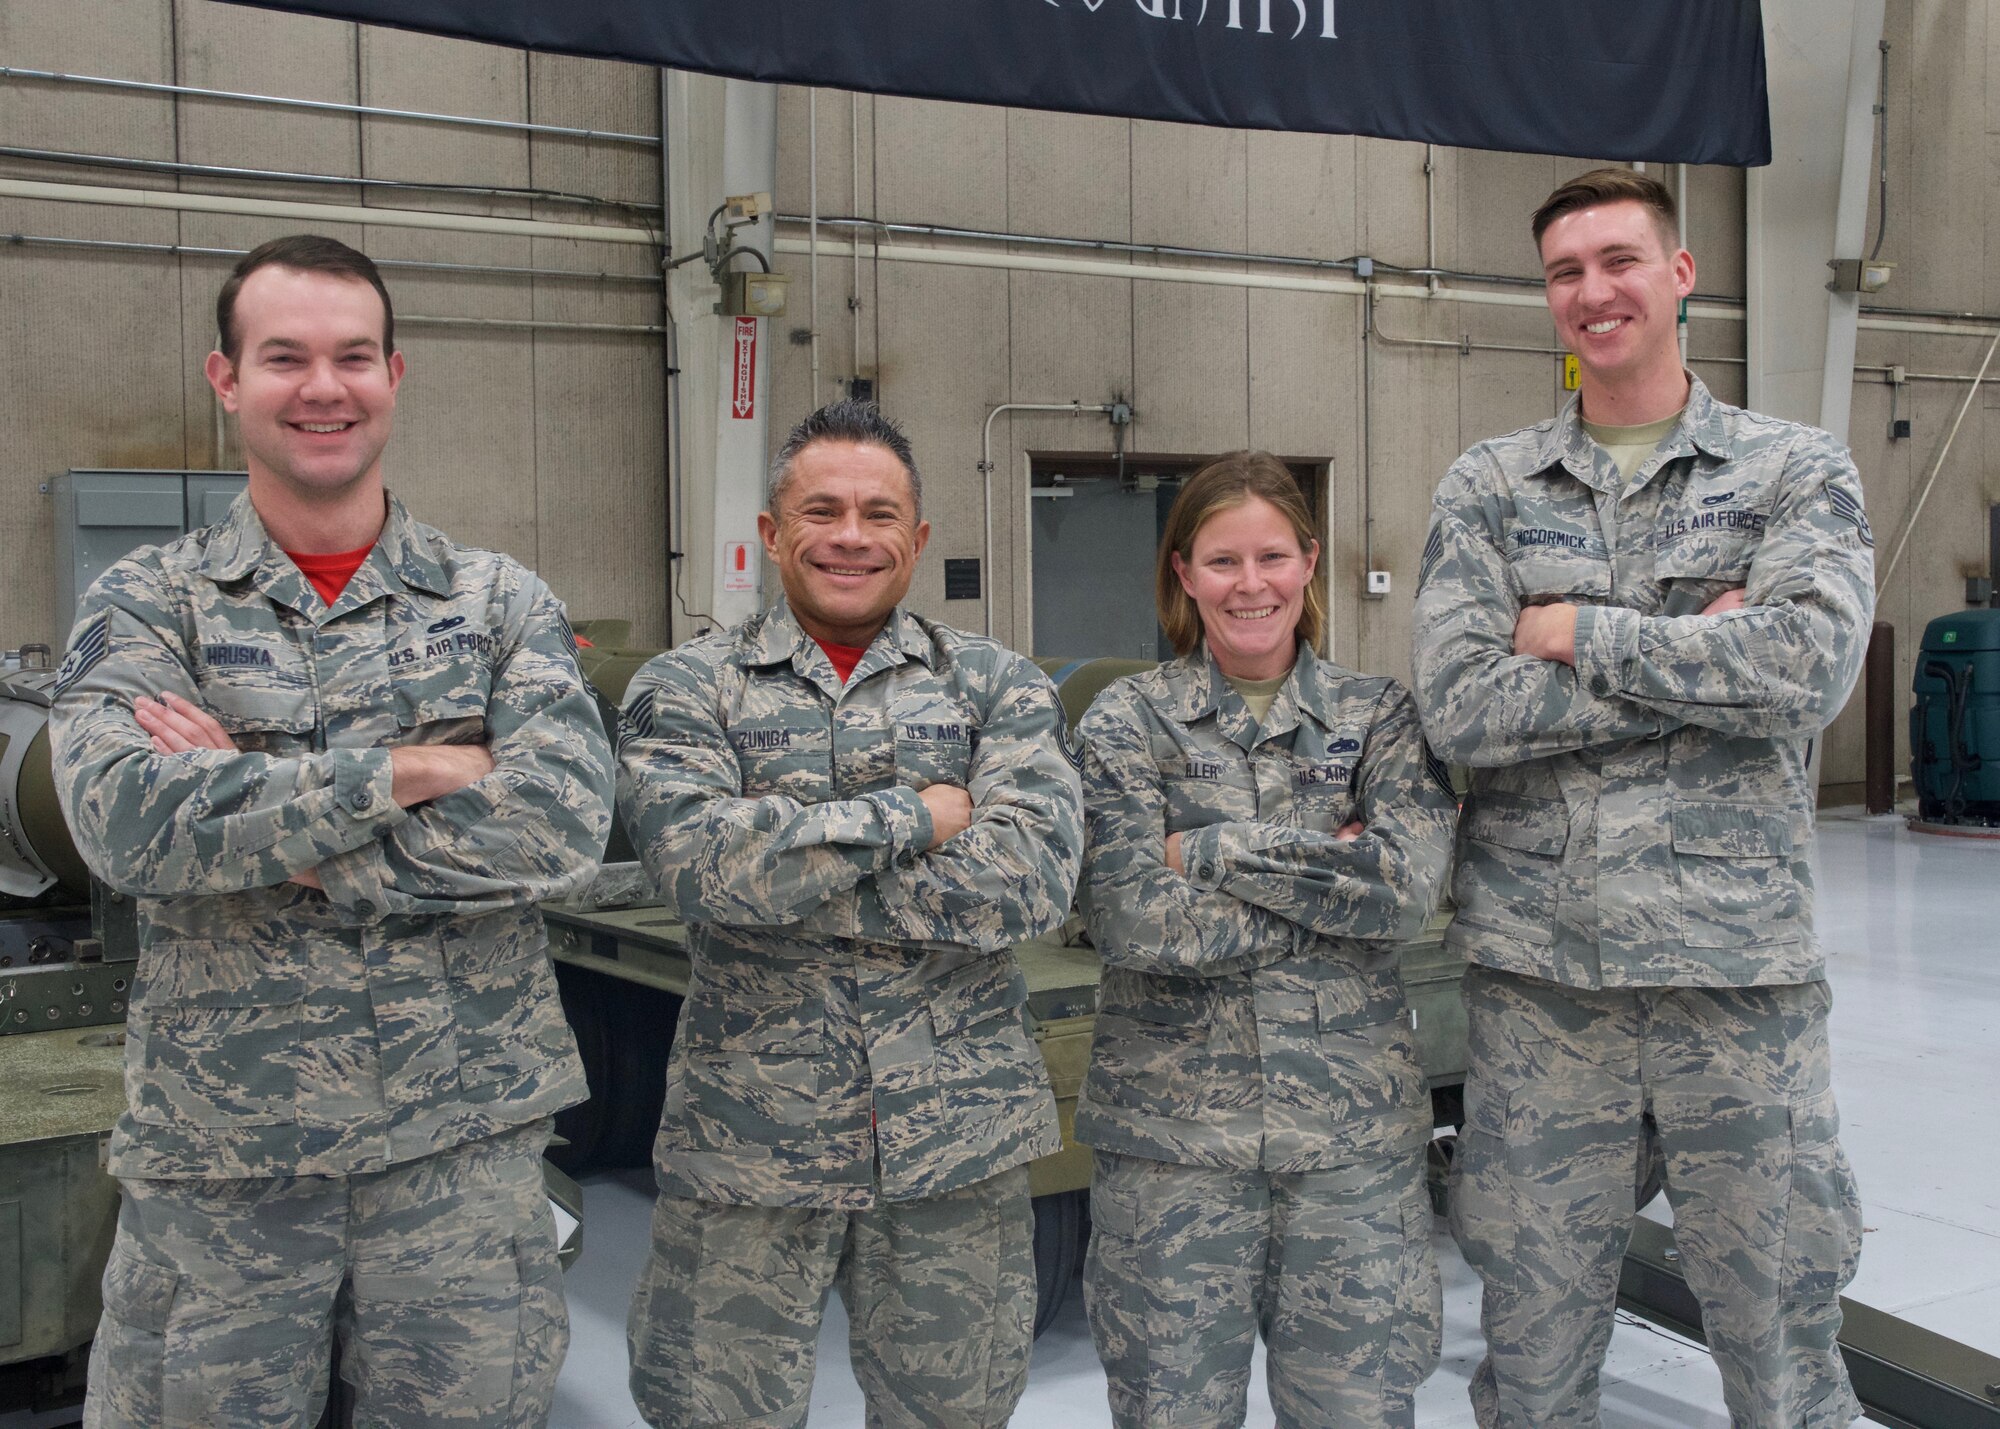 131st Bomb Wing Guardsmen were named 2019’s Best Nuclear Weapons Load Team. From Left to Right: Tech. Sgt. Mark Hruska, Tech. Sgt Ricardo Zuniga, Tech. Sgt. Athena Keller and Staff Sgt. Ethan McCormick. (U.S. Air Force photo by Master Sgt. Elise Rich)